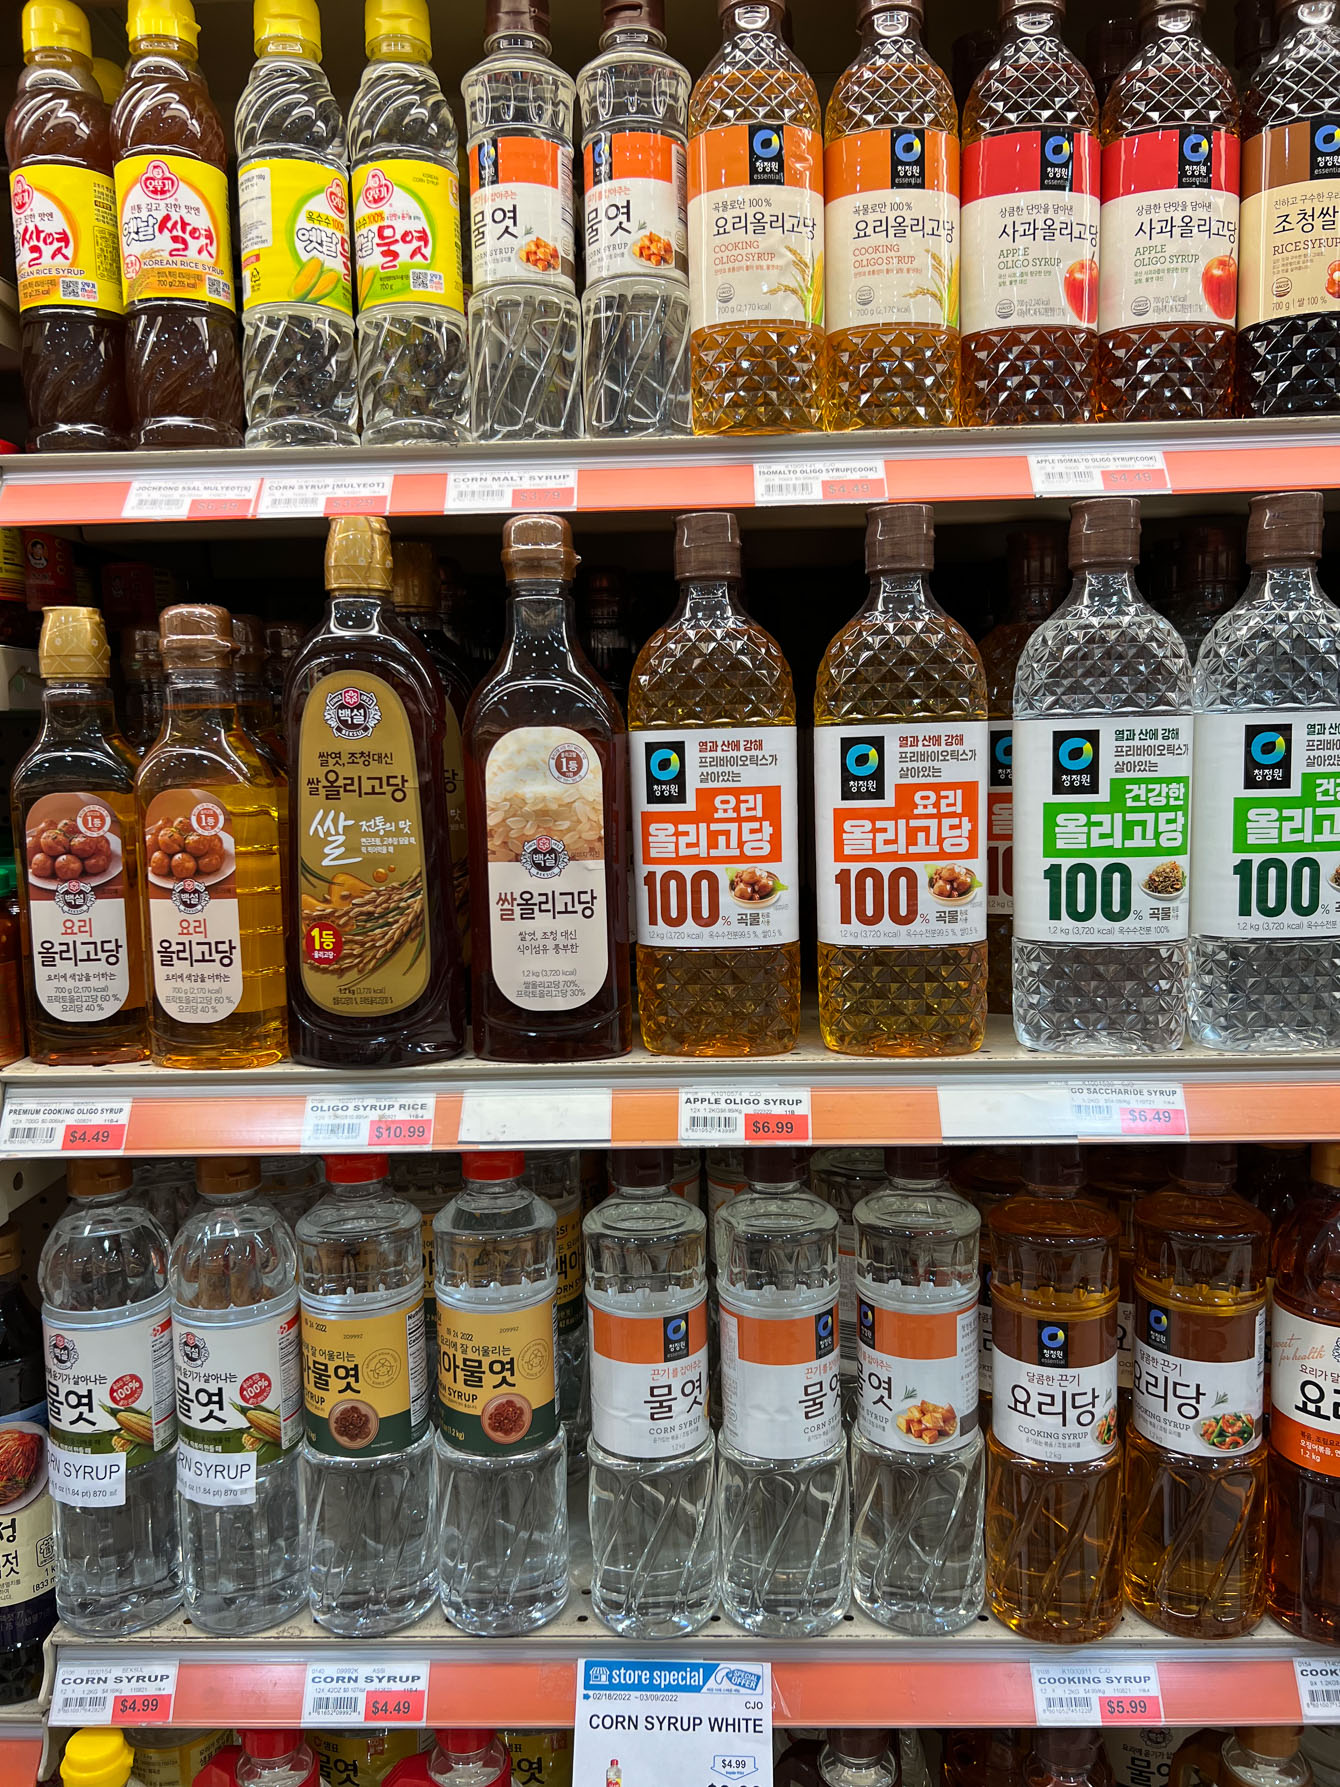 Korean syrups are one of the common Korean cooking ingredients.